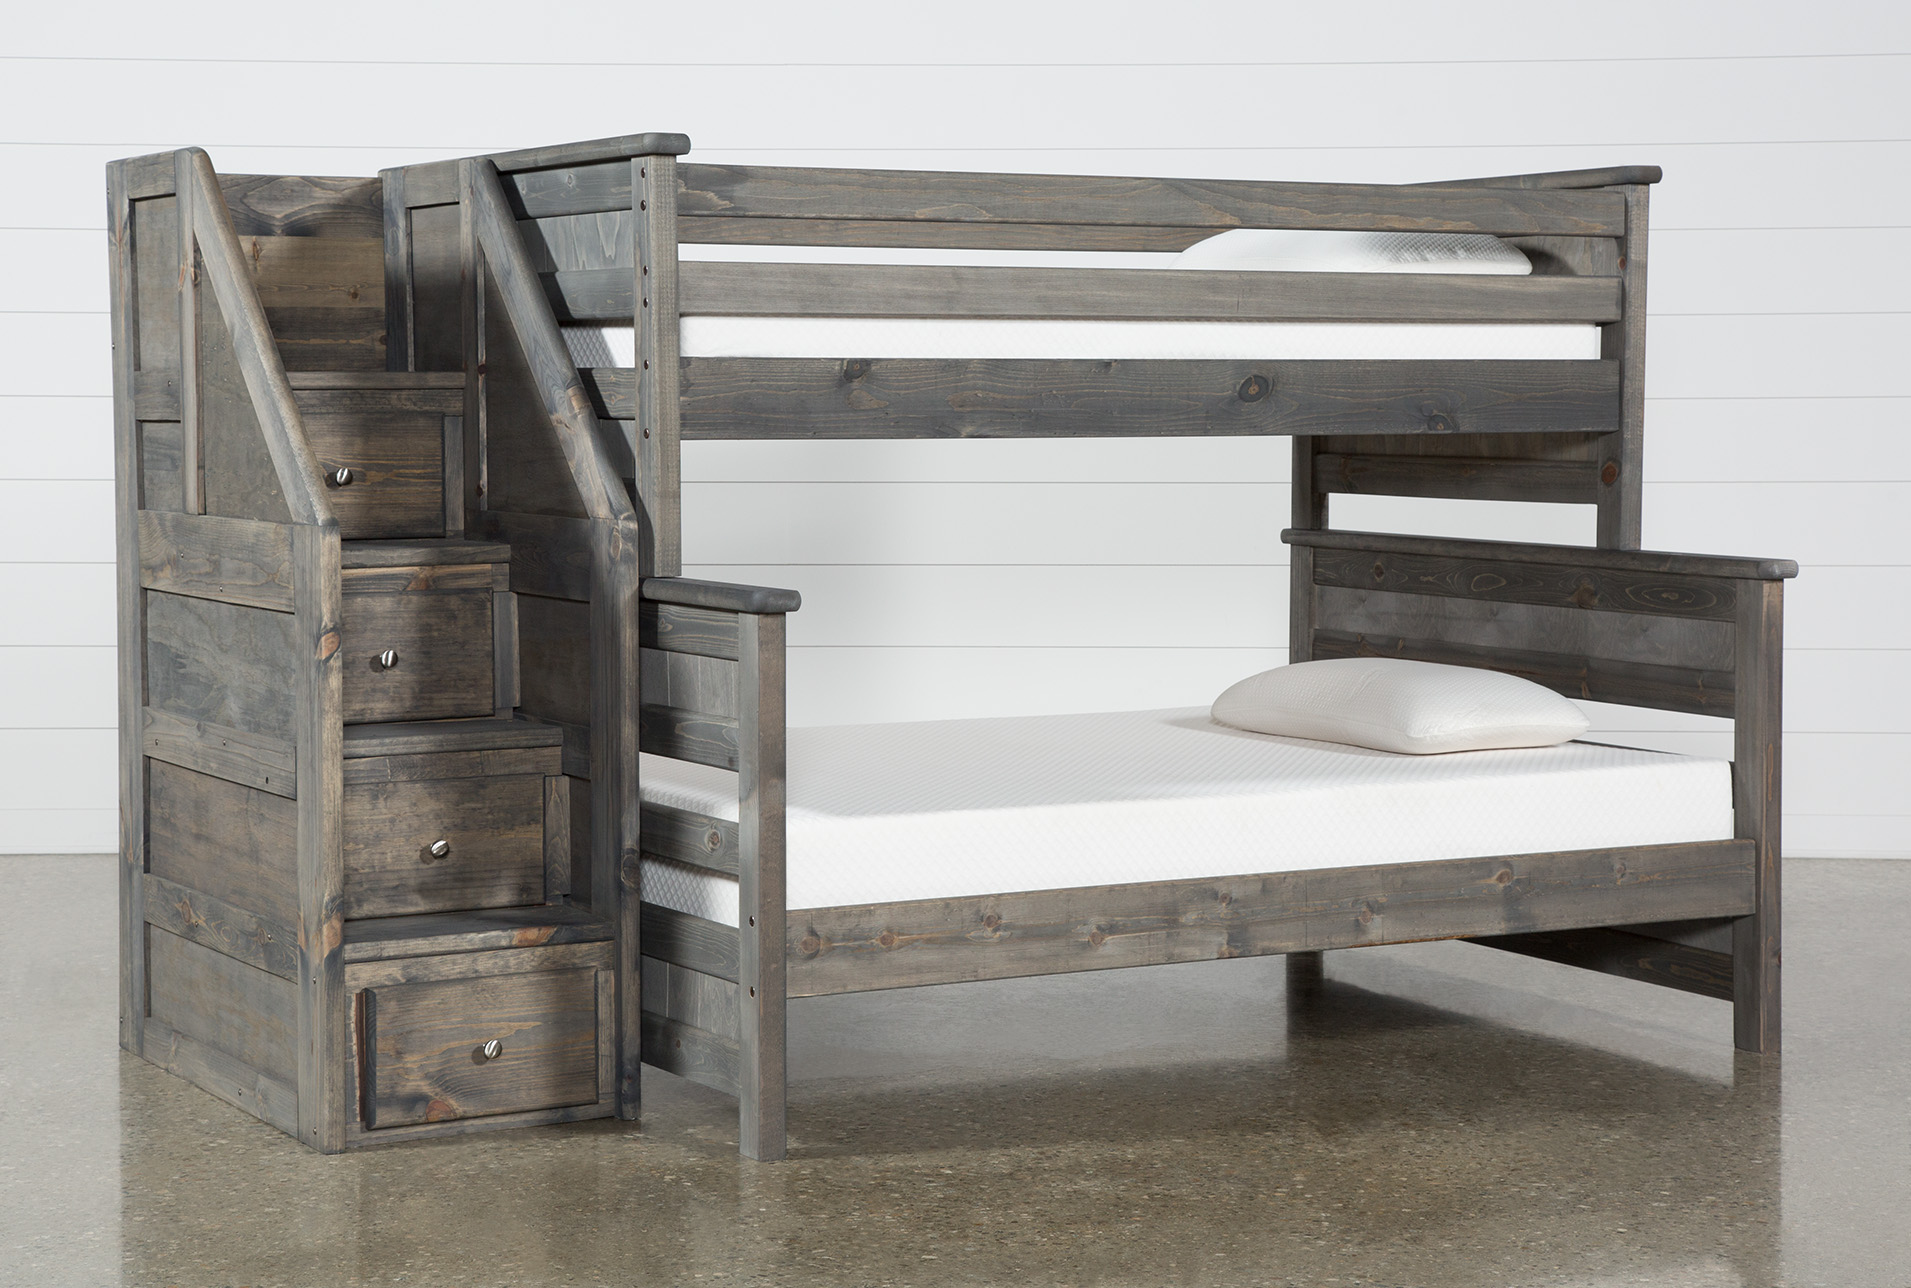 bunk bed with drawer steps